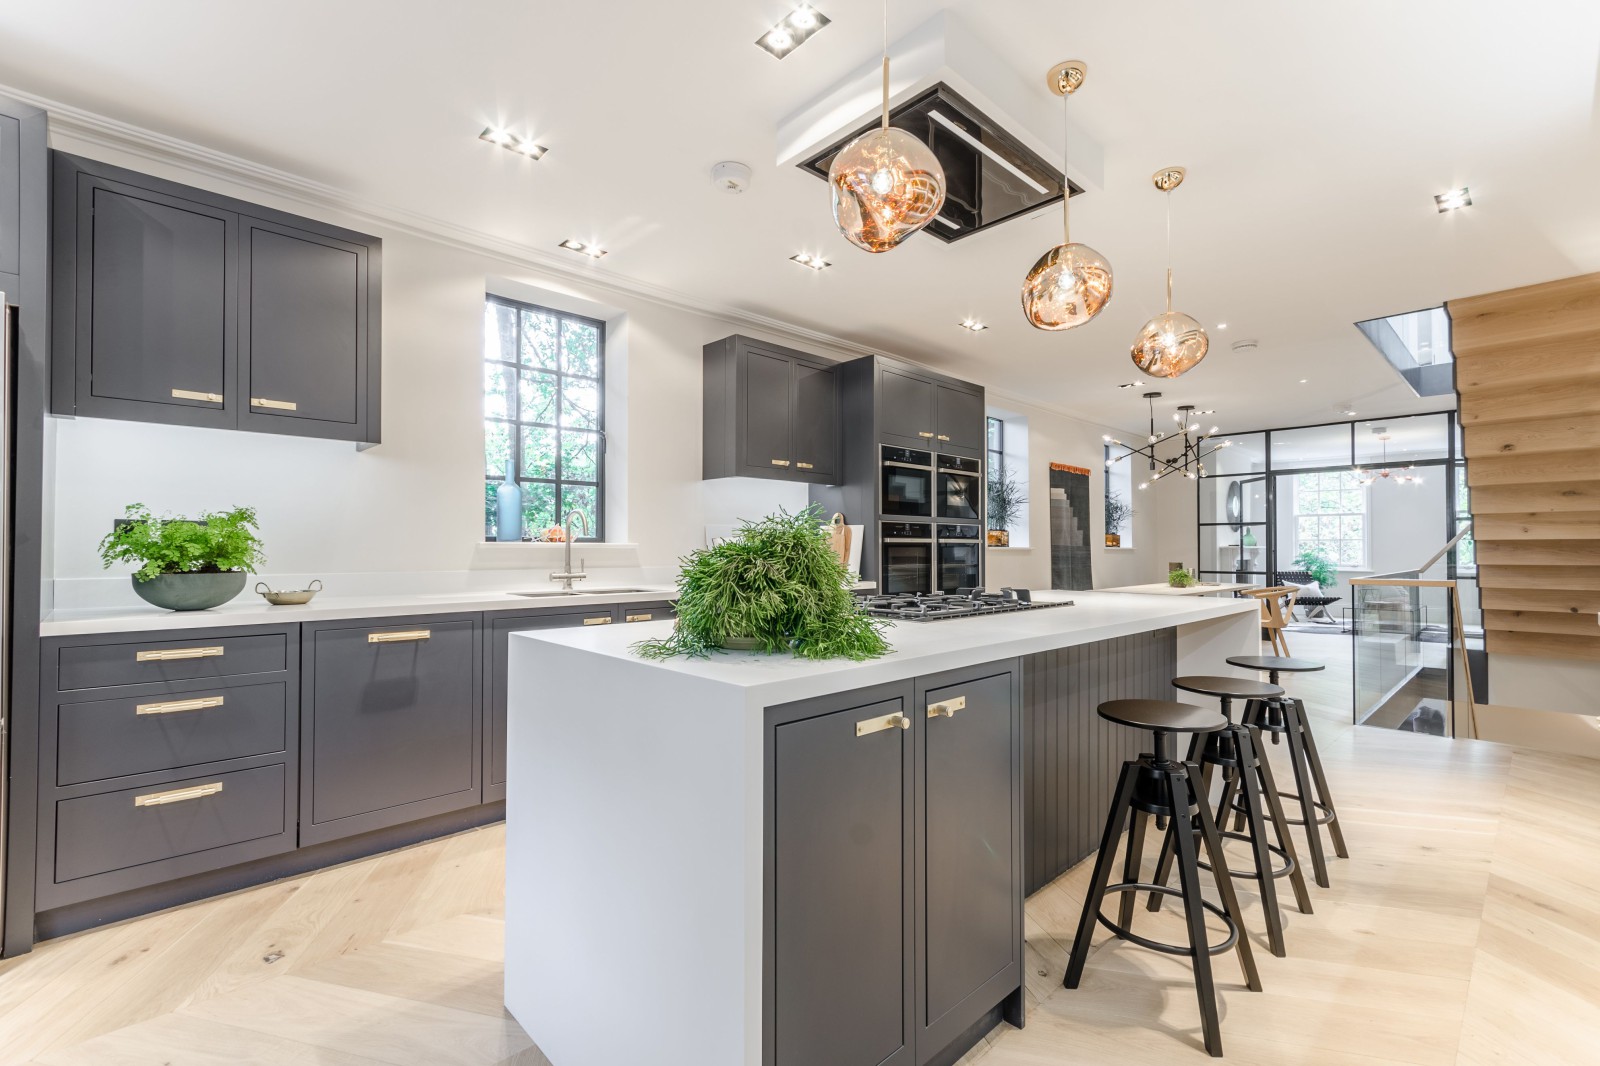 Inspirational kitchens for cooking Christmas dinner | Foxtons